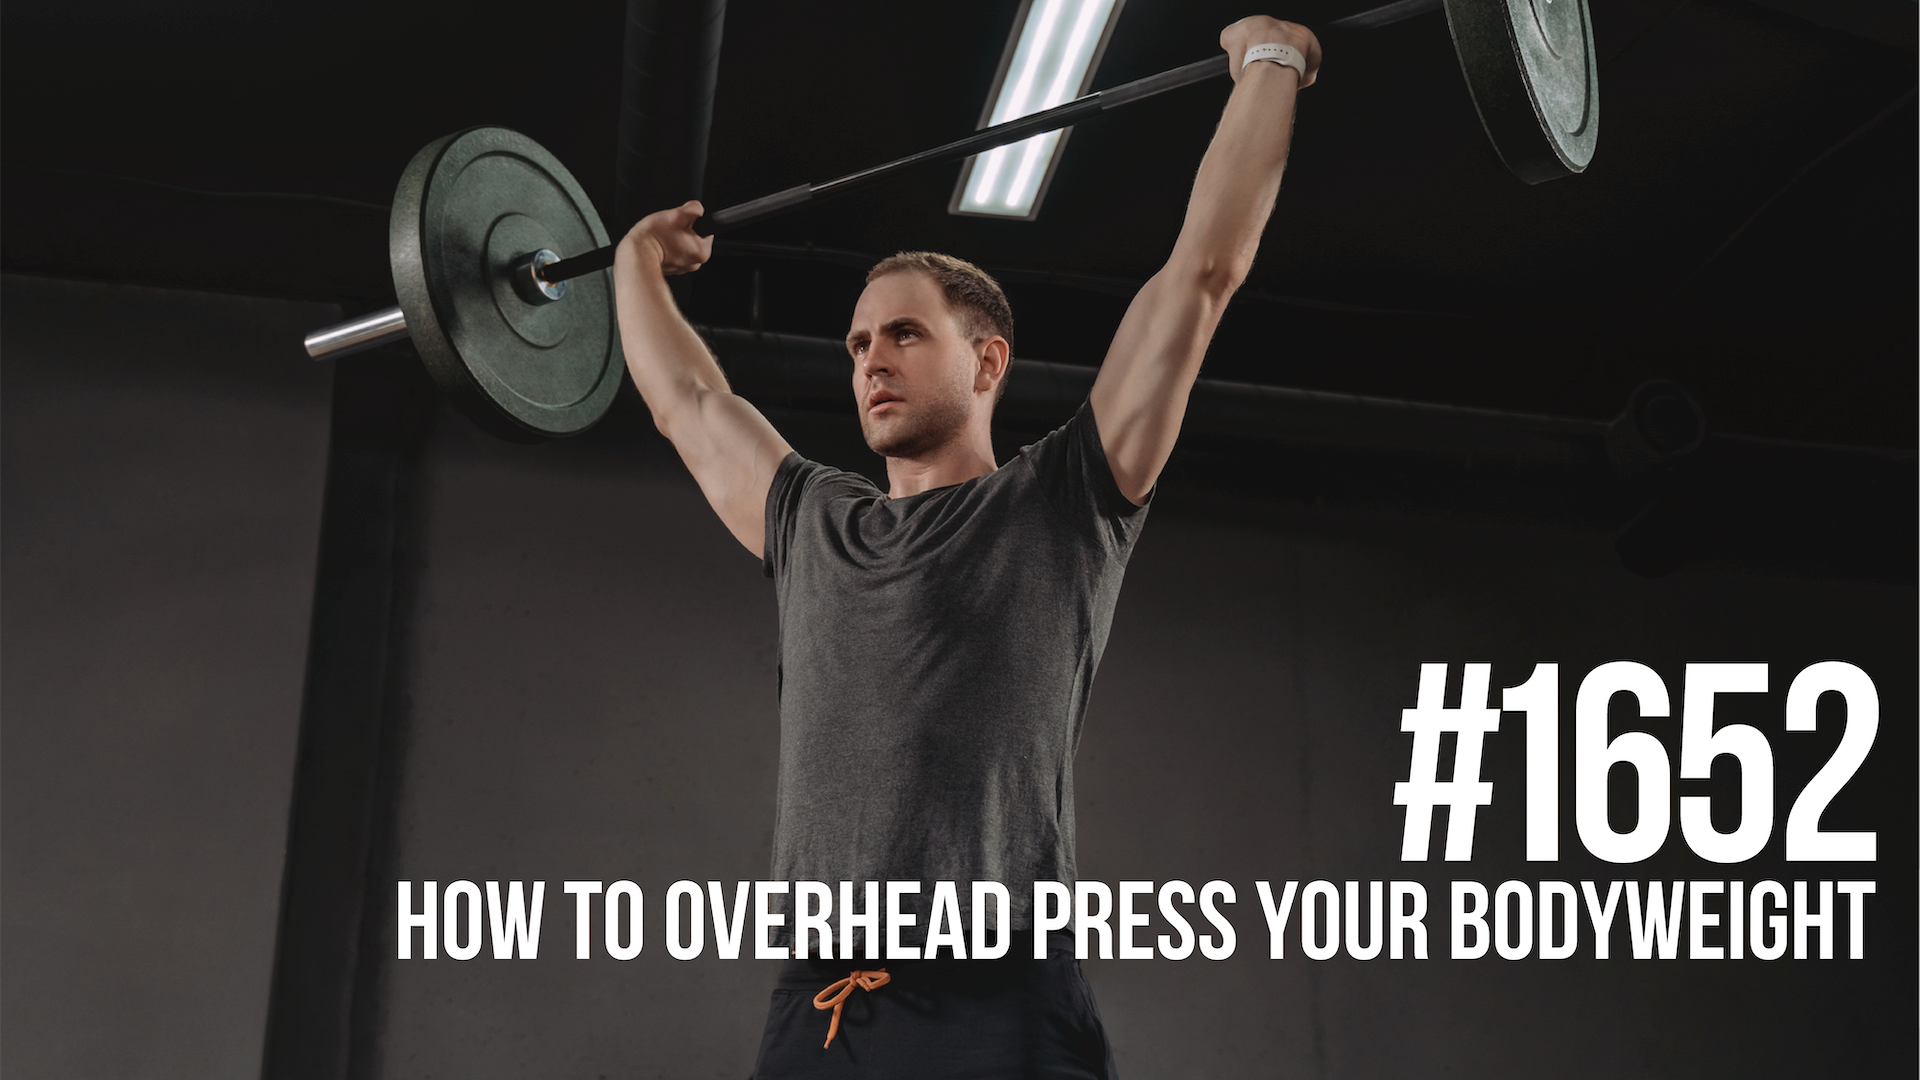 1652: How to Overhead Press Your Bodyweight